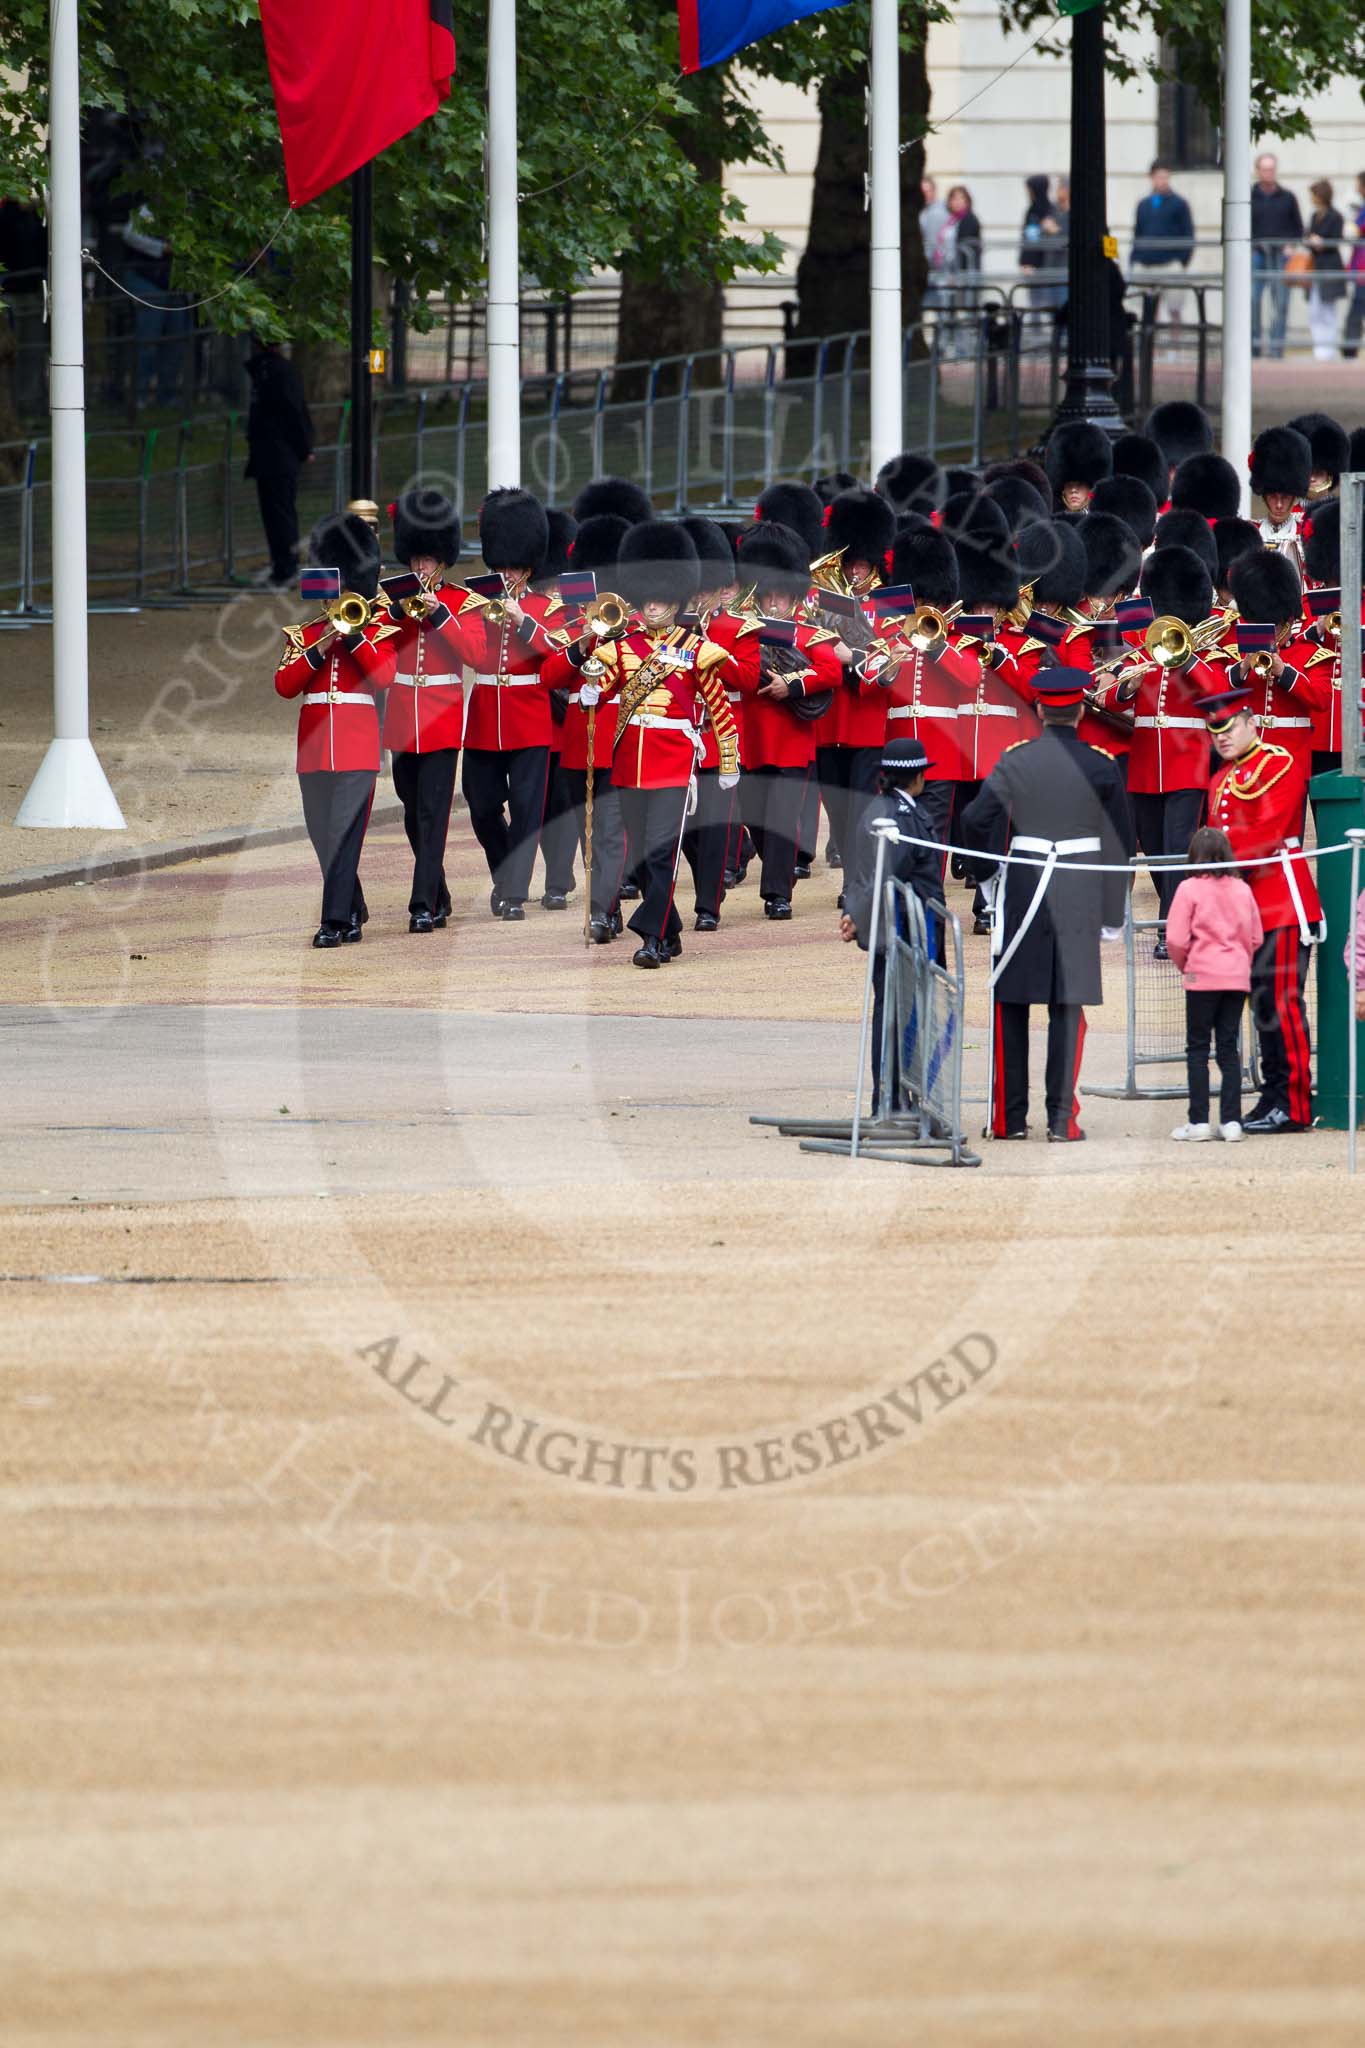 The Major General's Review 2011: Drum Major Scott Fitzgerald, Coldstream Guards, leading the Band of the Coldstream Guards down Horse Guards Road towards the parade ground..
Horse Guards Parade, Westminster,
London SW1,
Greater London,
United Kingdom,
on 28 May 2011 at 10:23, image #34